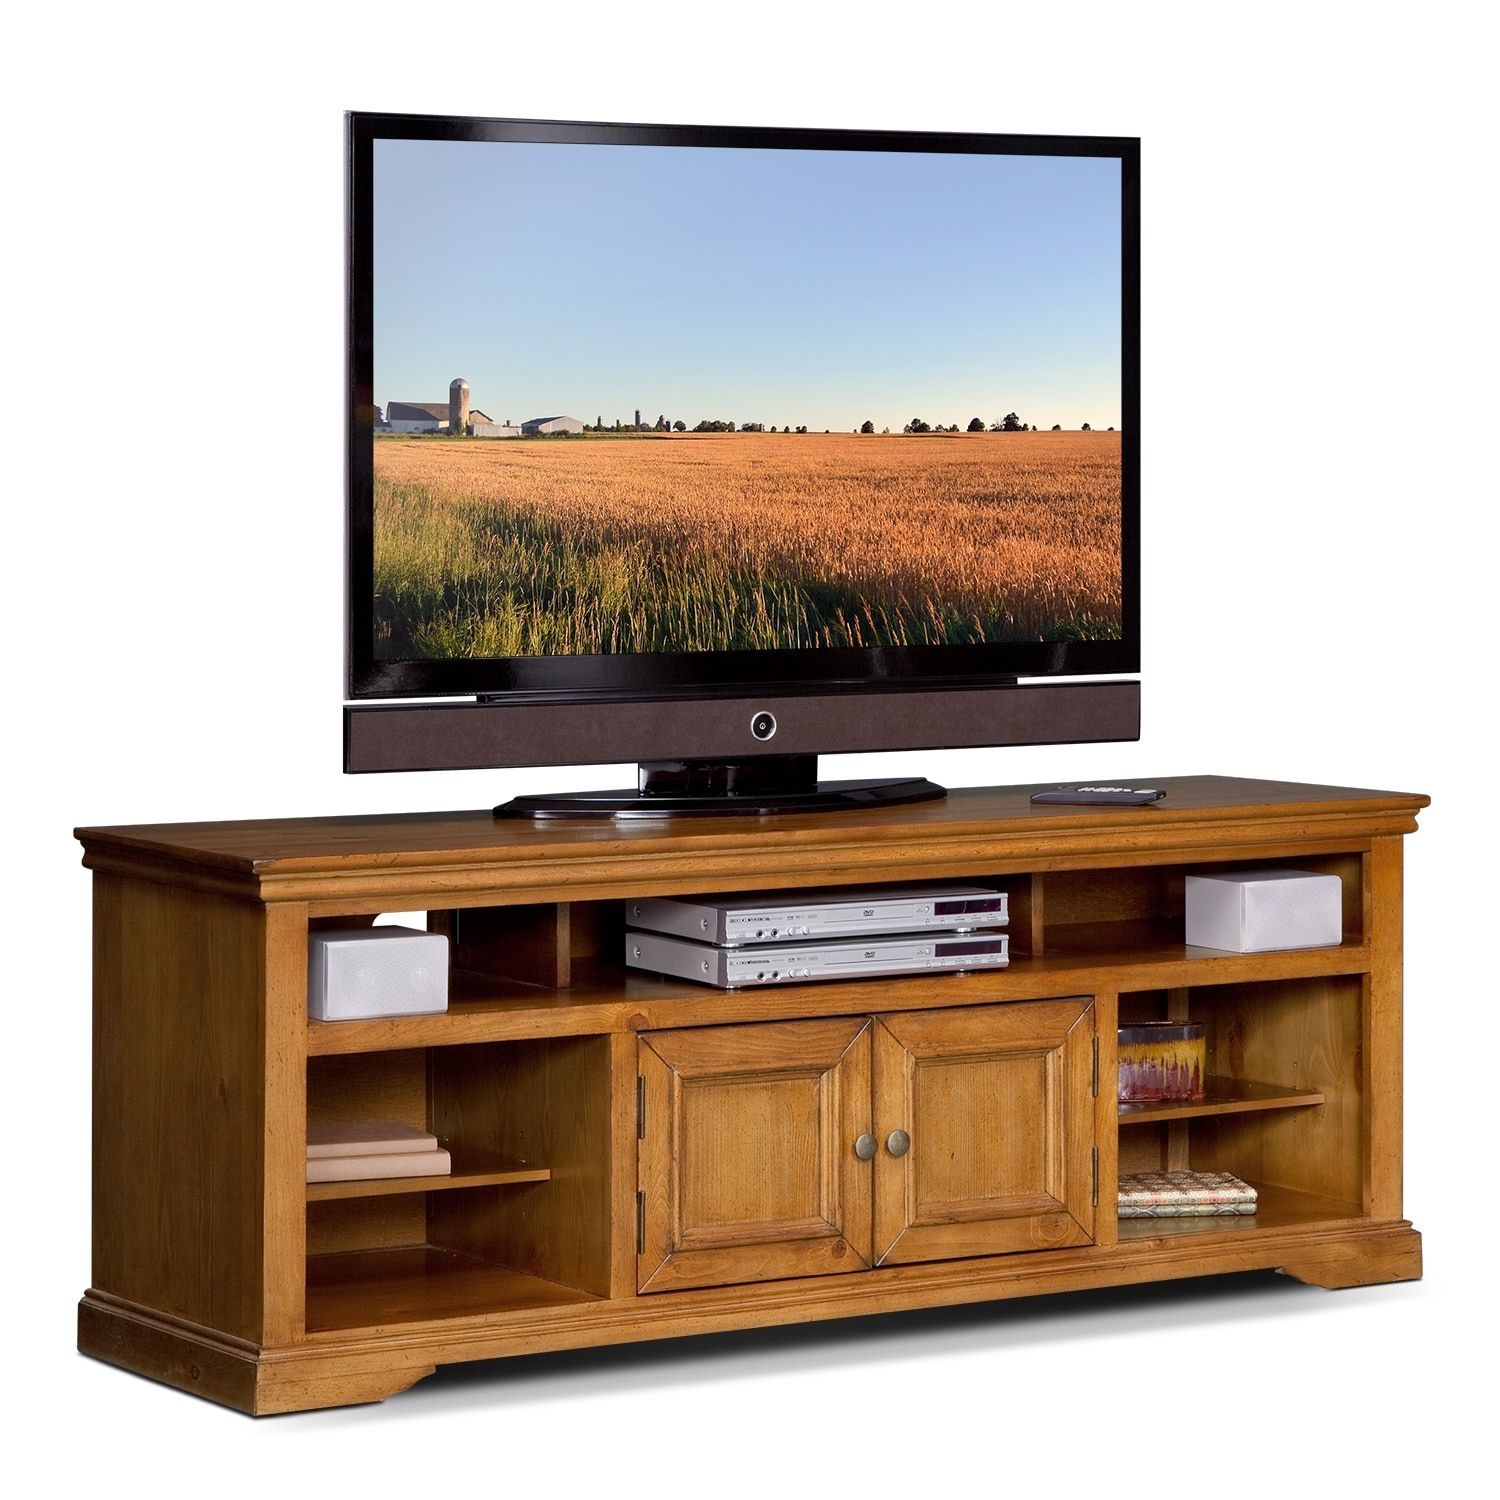 Jenson 70" Tv Stand – Pine | American Signature Furniture Throughout Pine Tv Stands (View 7 of 15)